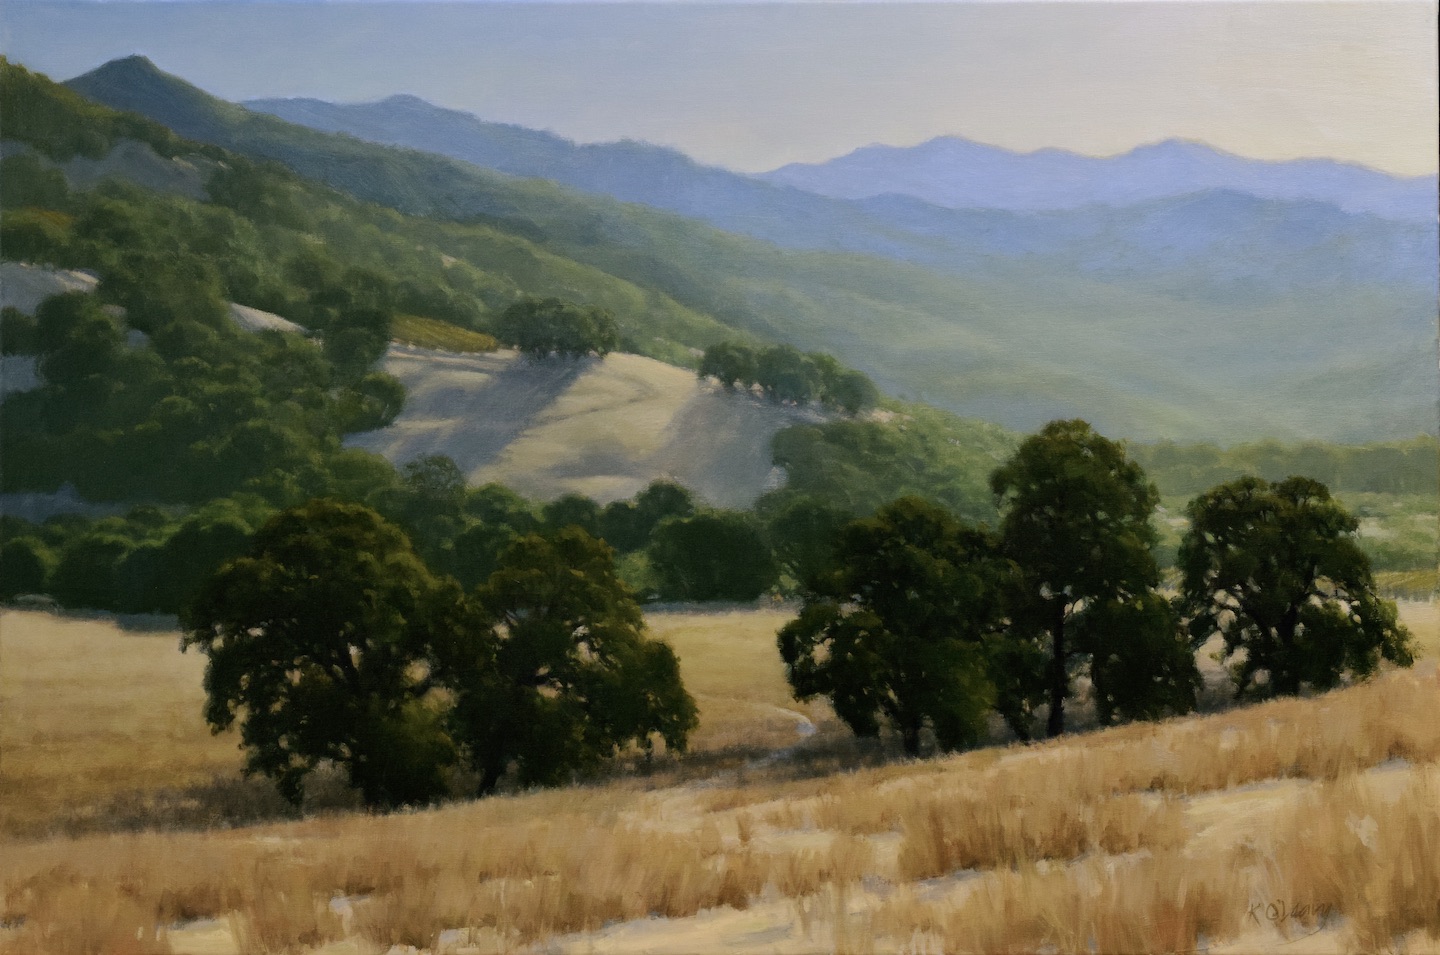 Landscape painting: Sunrise over the Valley by Kathy O'Leary